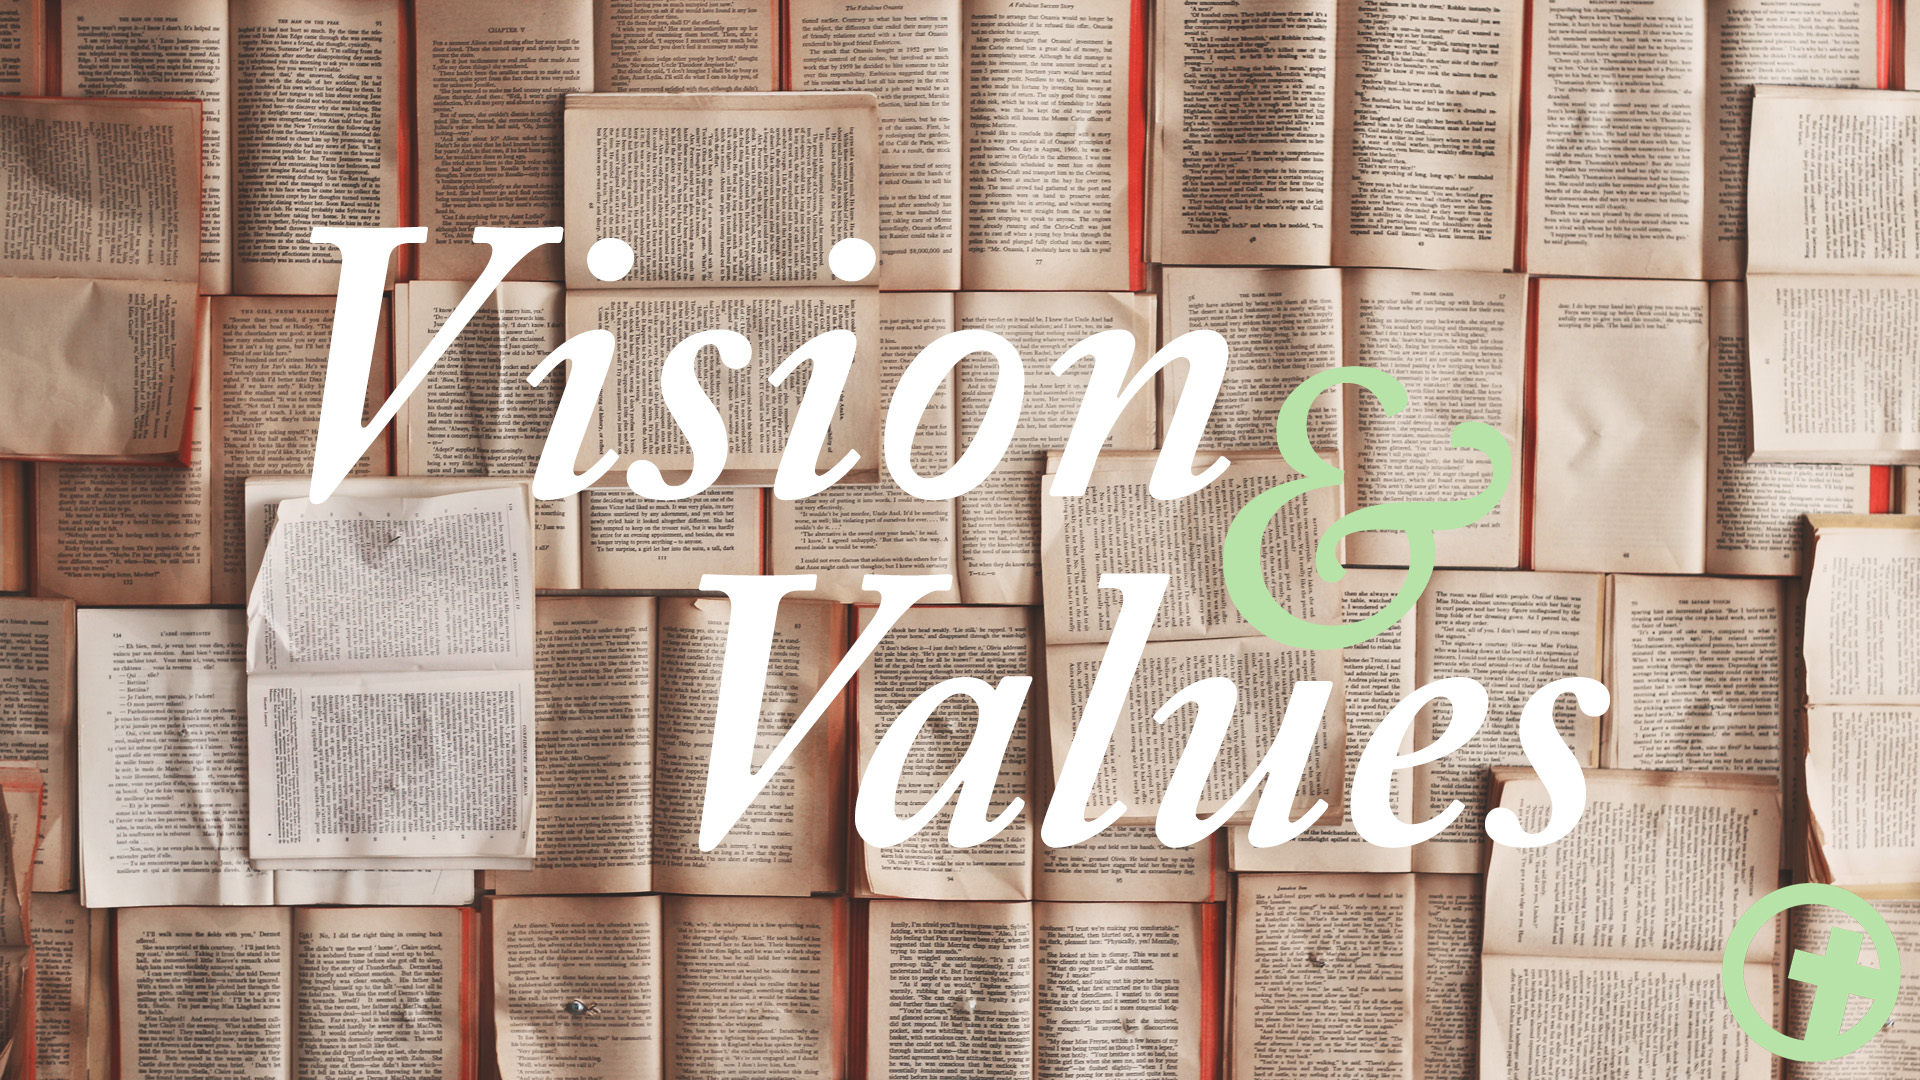 Vision & Values Sunday: Love Each Other